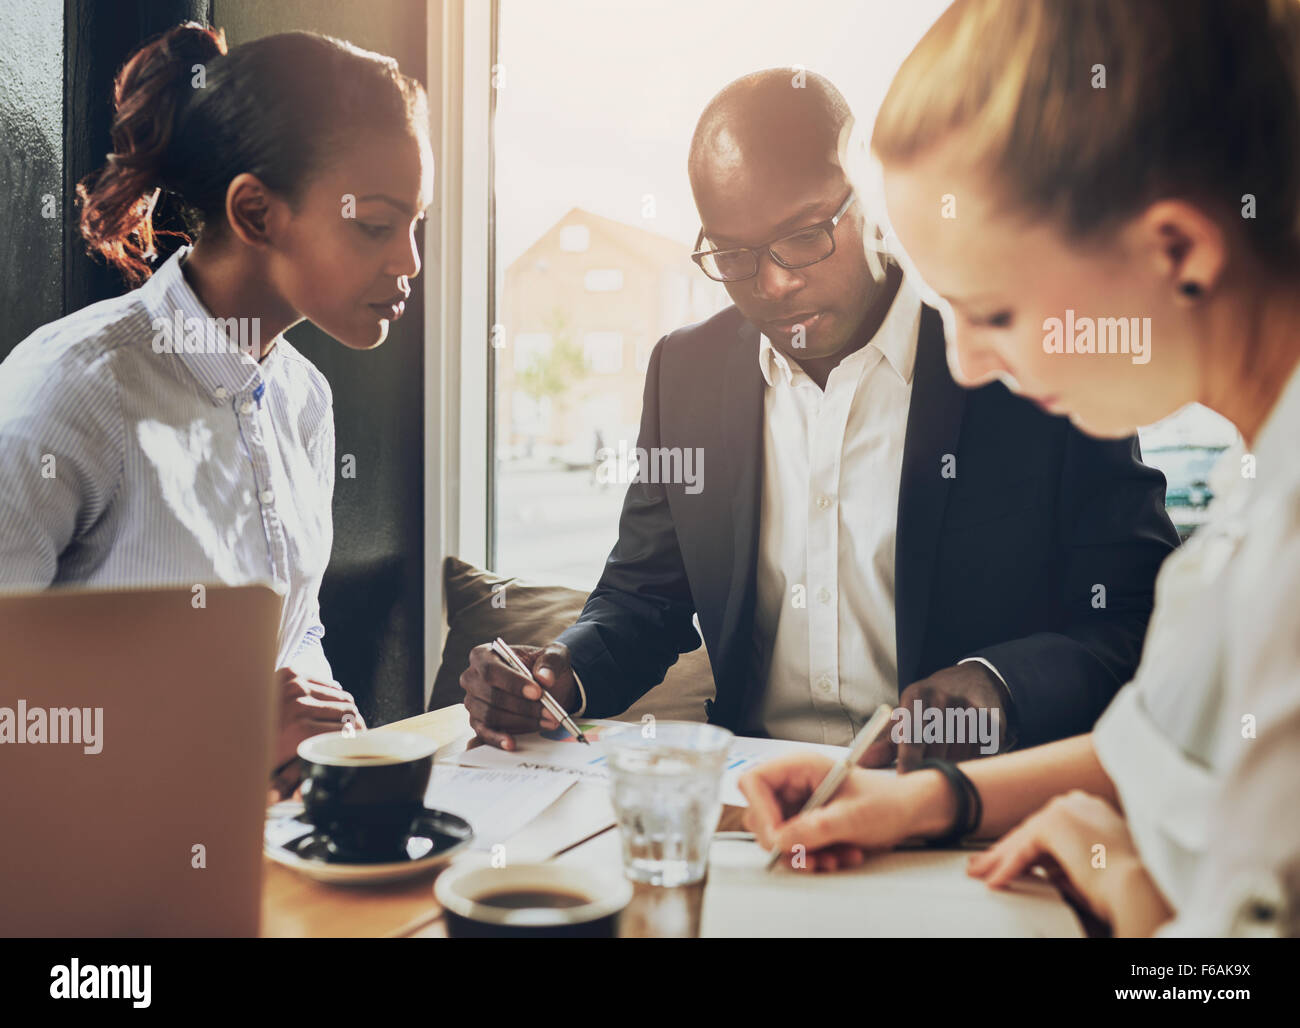 Serious group of business people working, multi ethnic group, business, entrepreneur, start up concept Stock Photo